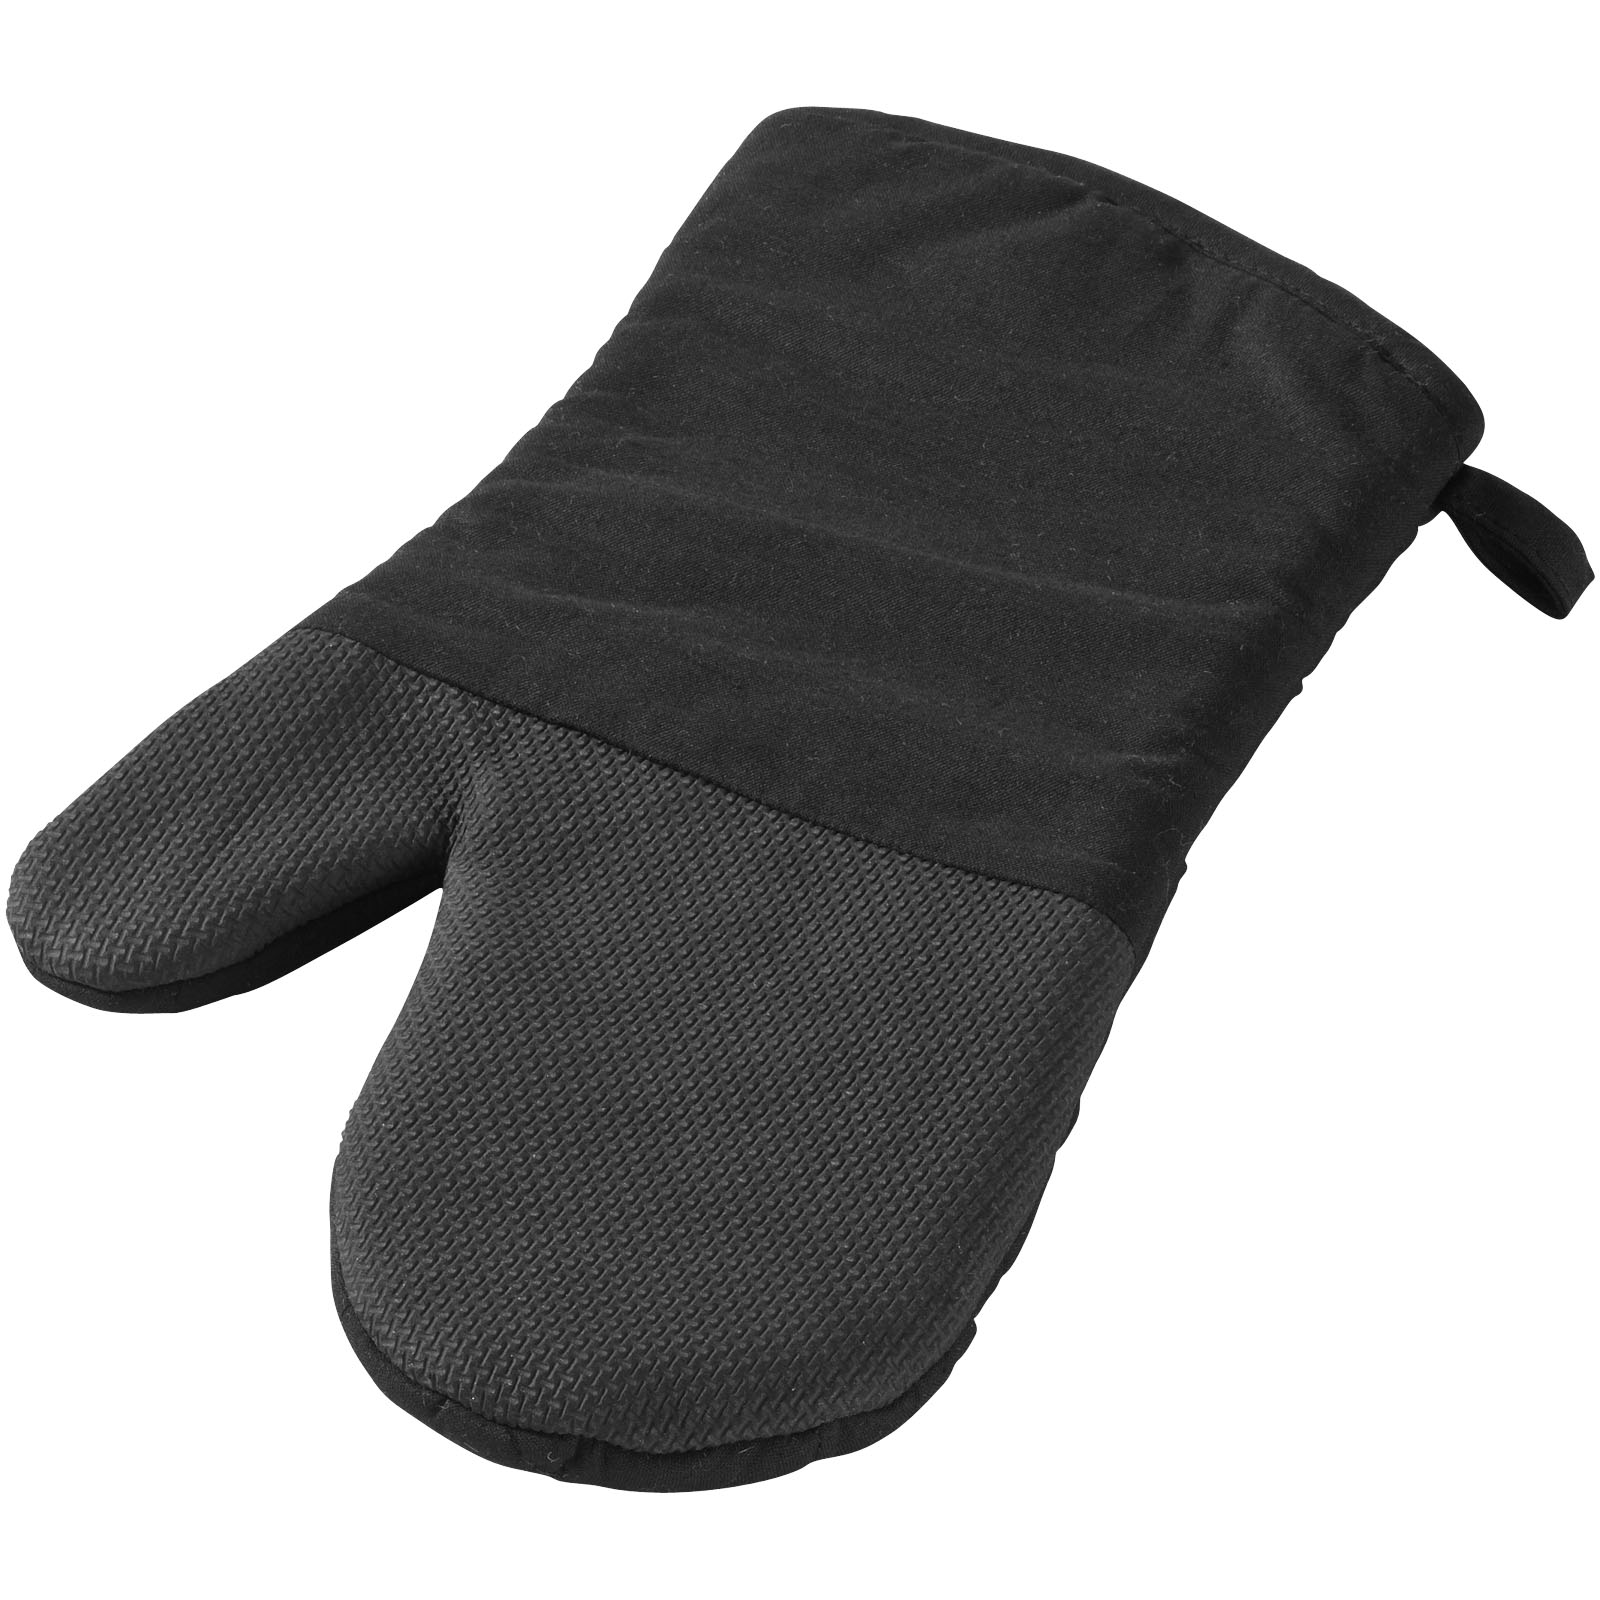 Advertising Kitchen Linen - Maya oven gloves with silicone grip - 0